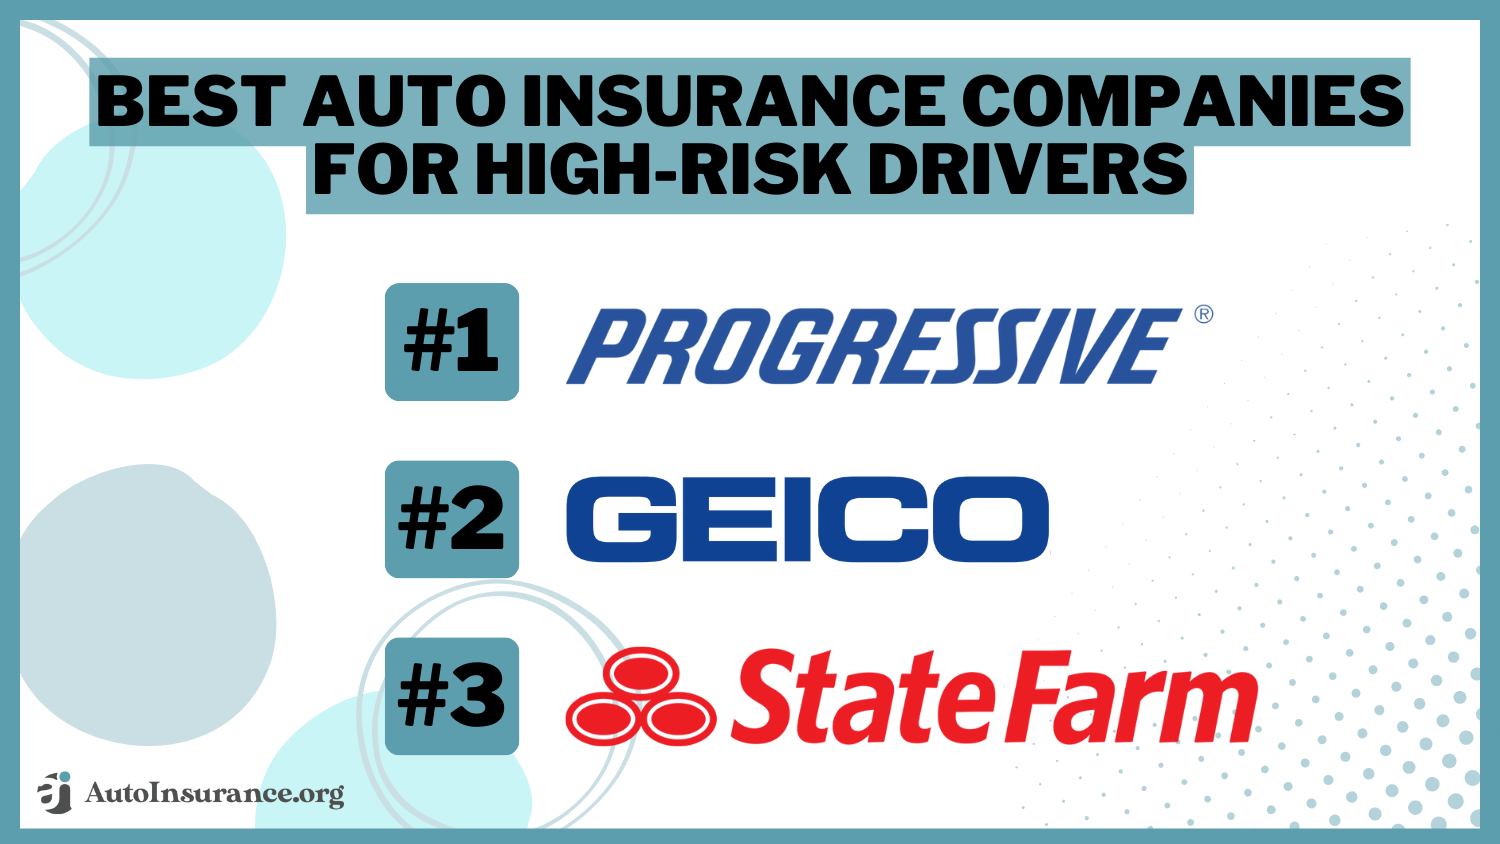 Progressive, Geico, and State Farm: Best Auto Insurance Companies for High-Risk Drivers